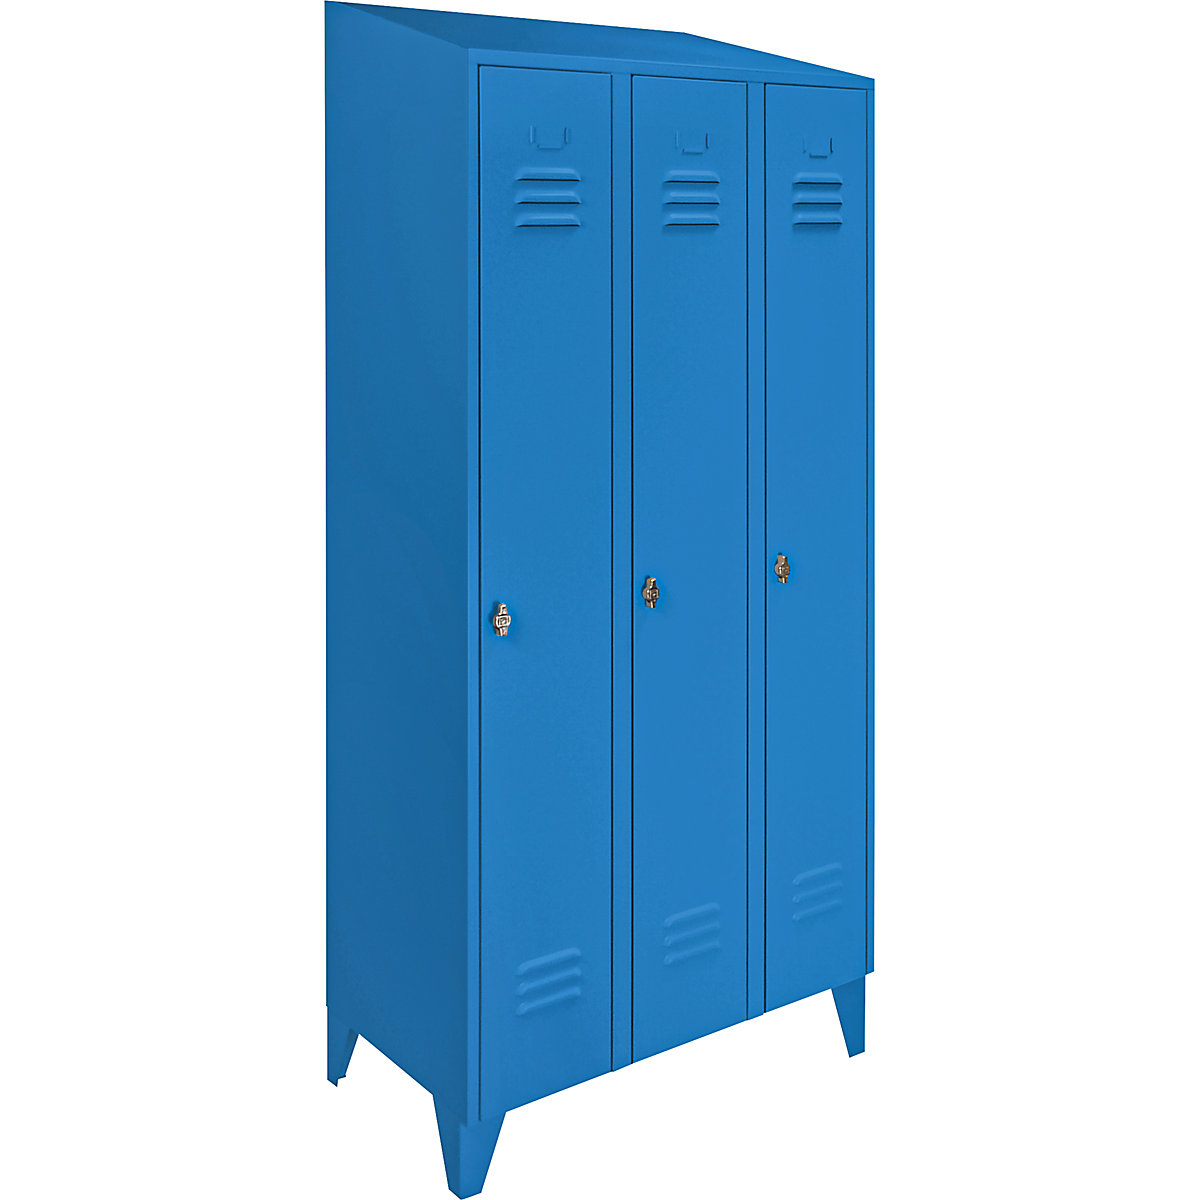 Steel cupboard with sloping top, full height compartments – Wolf, total width 900 mm, 3 compartments, light blue RAL 5012-4